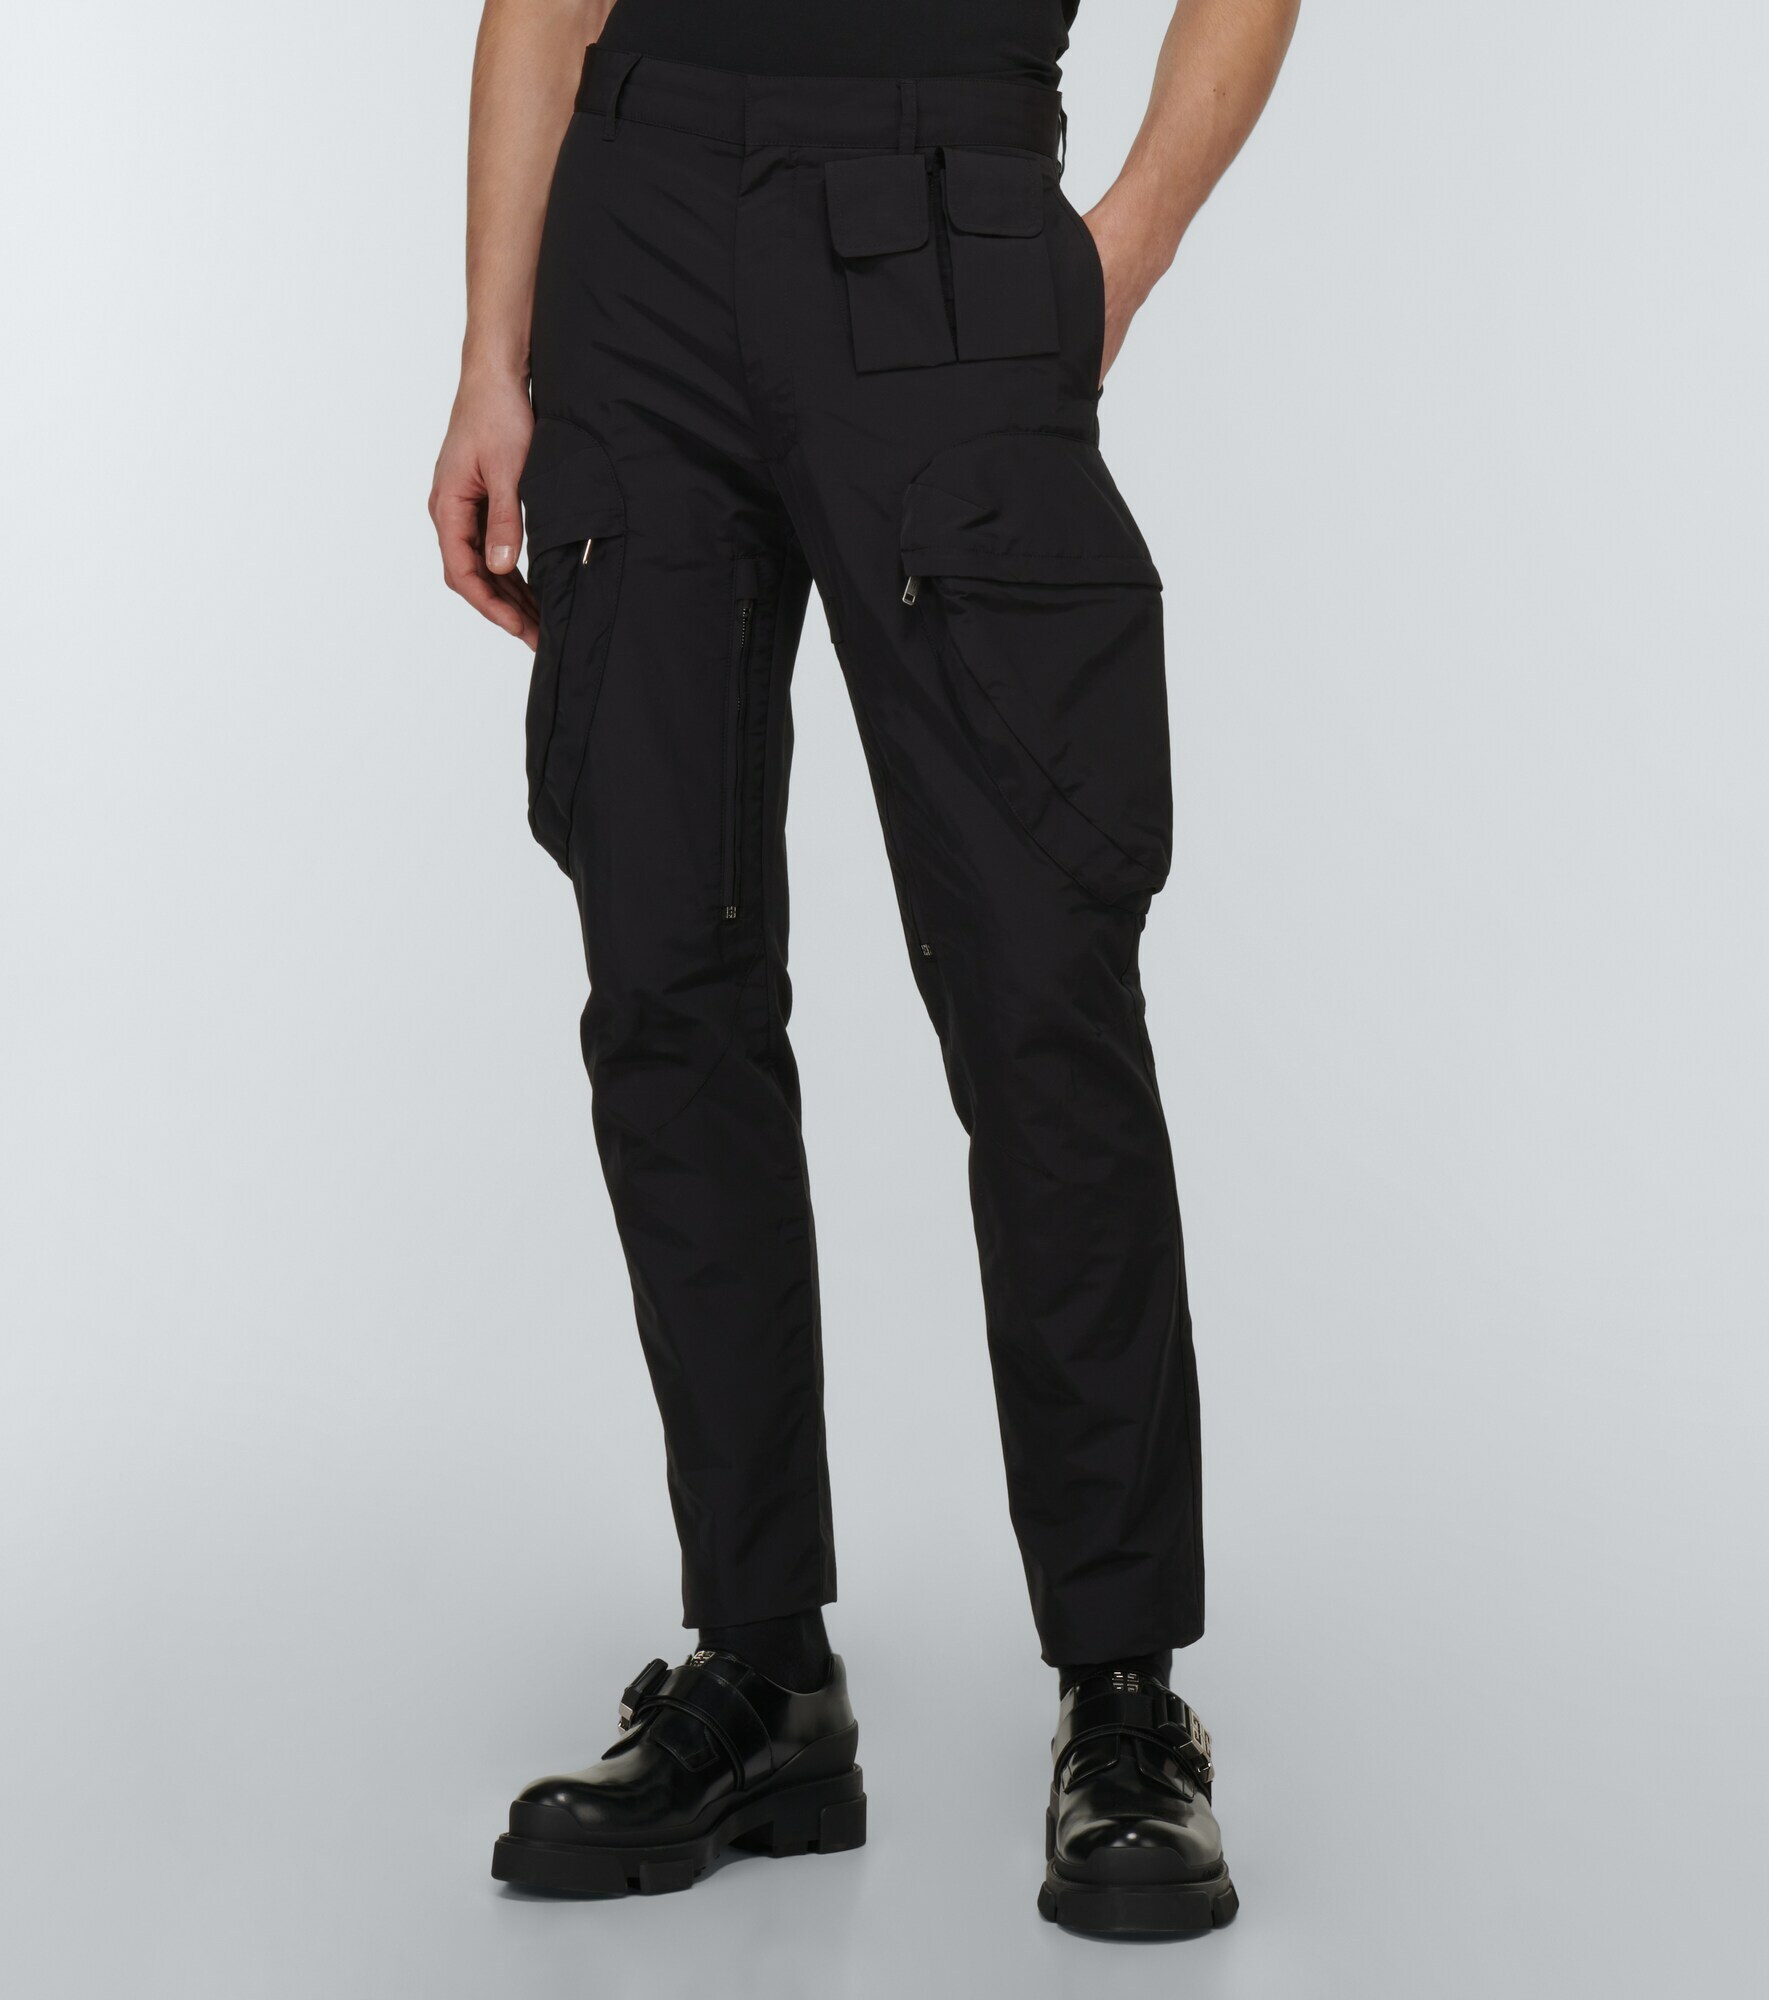 Givenchy - Slim-fit technical cotton-blend cargo pants Givenchy